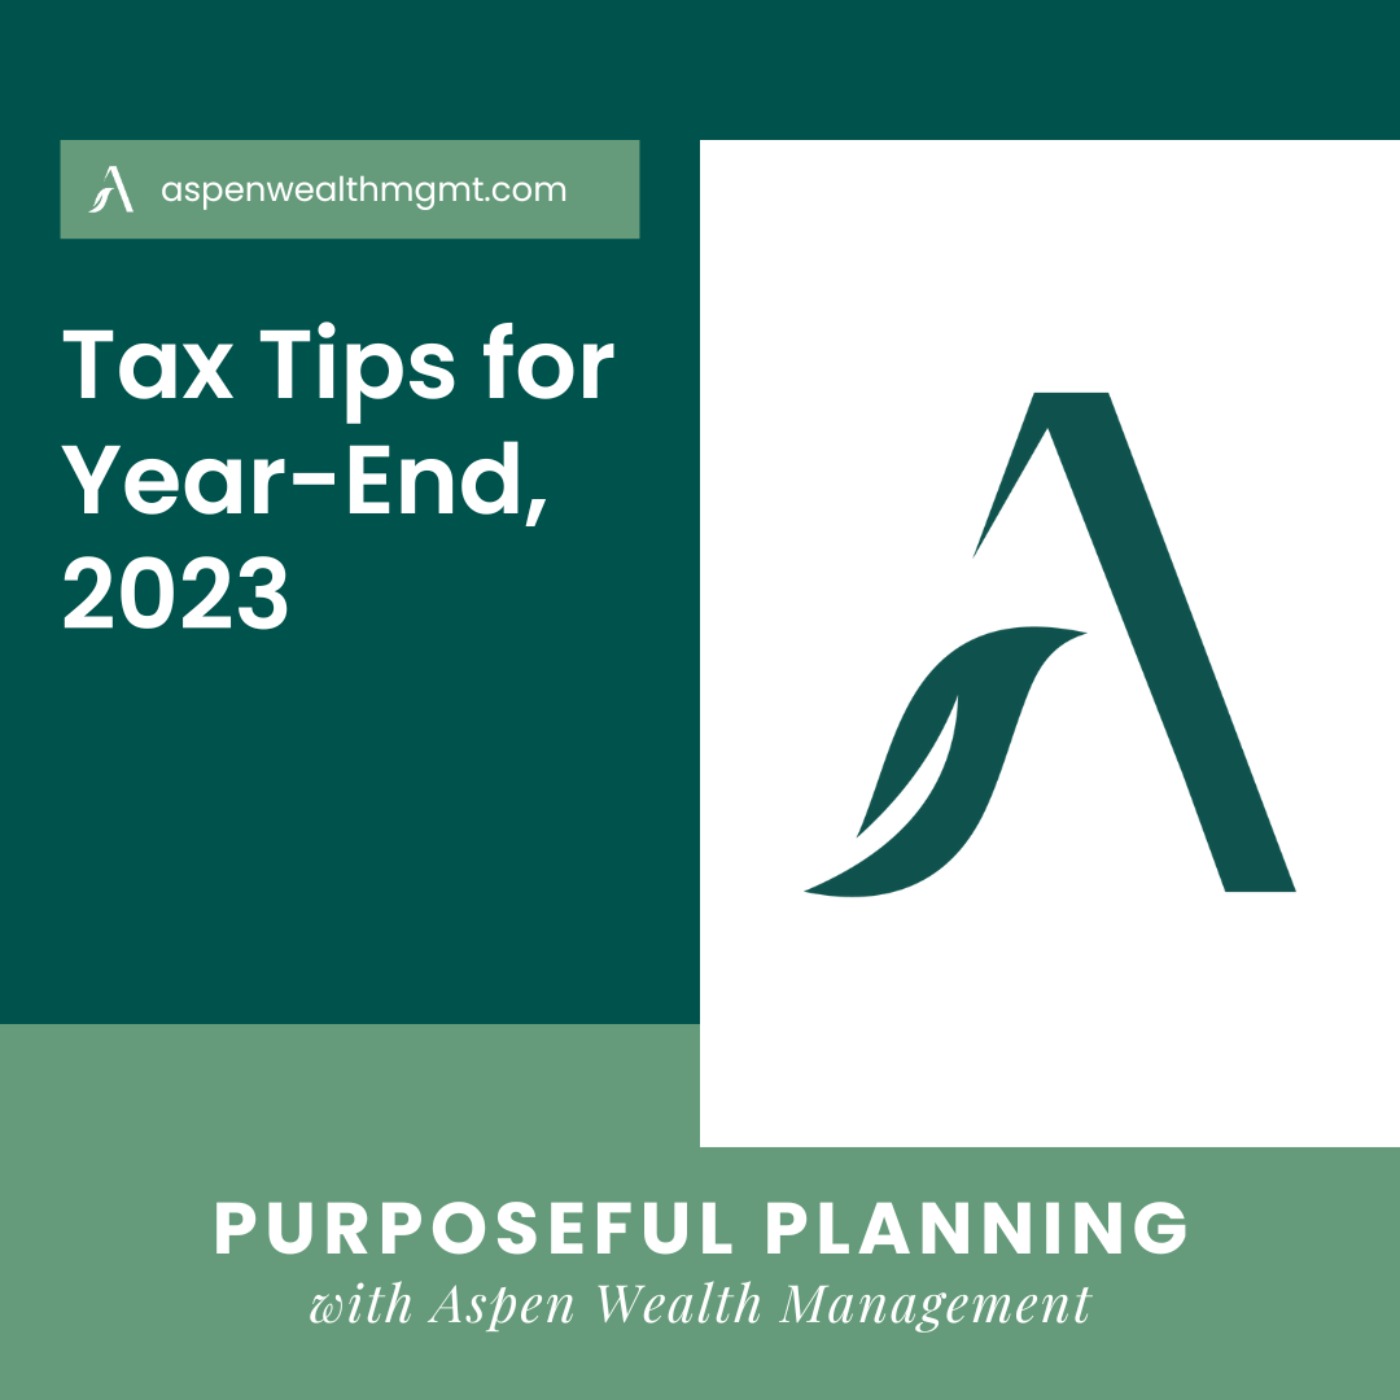 Tax Tips for Year-End, 2023